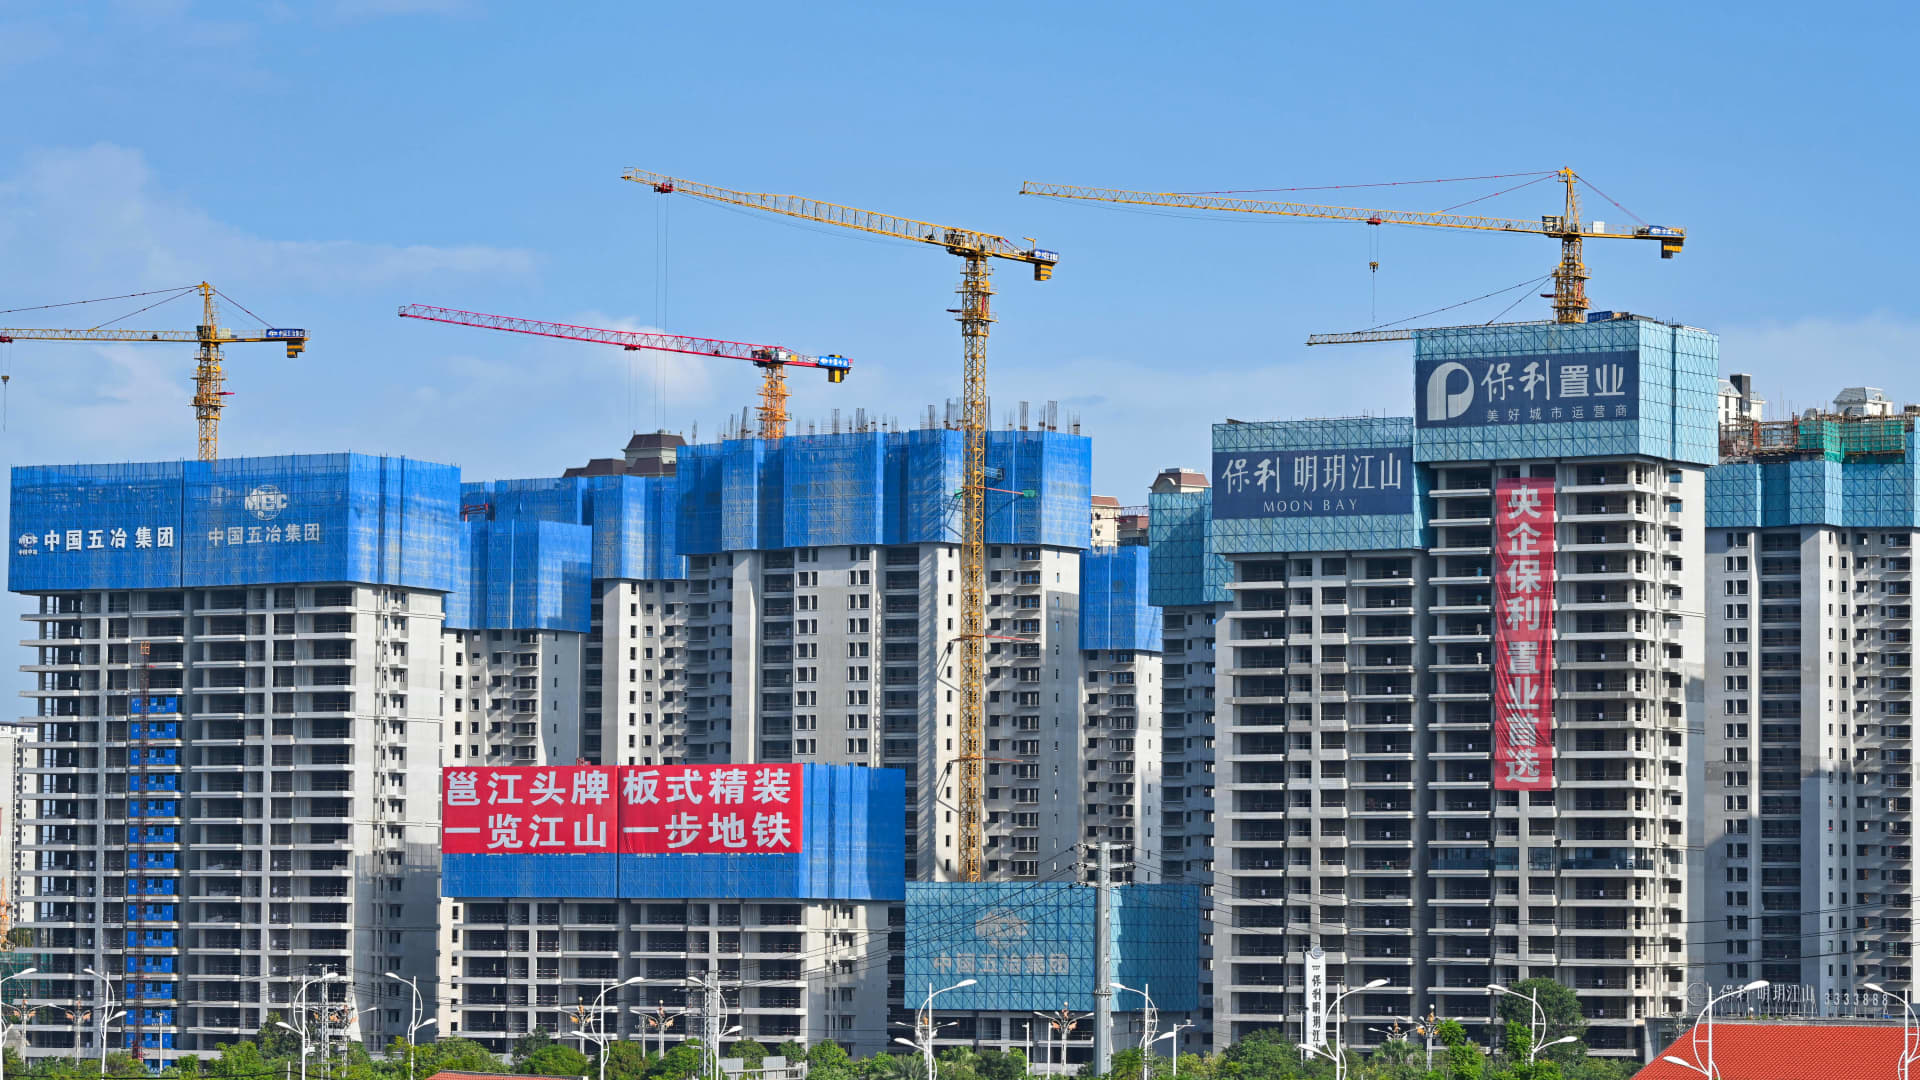 Chinese Investors Launch Property Developers Association, Declare Kenya “Our Second Home”